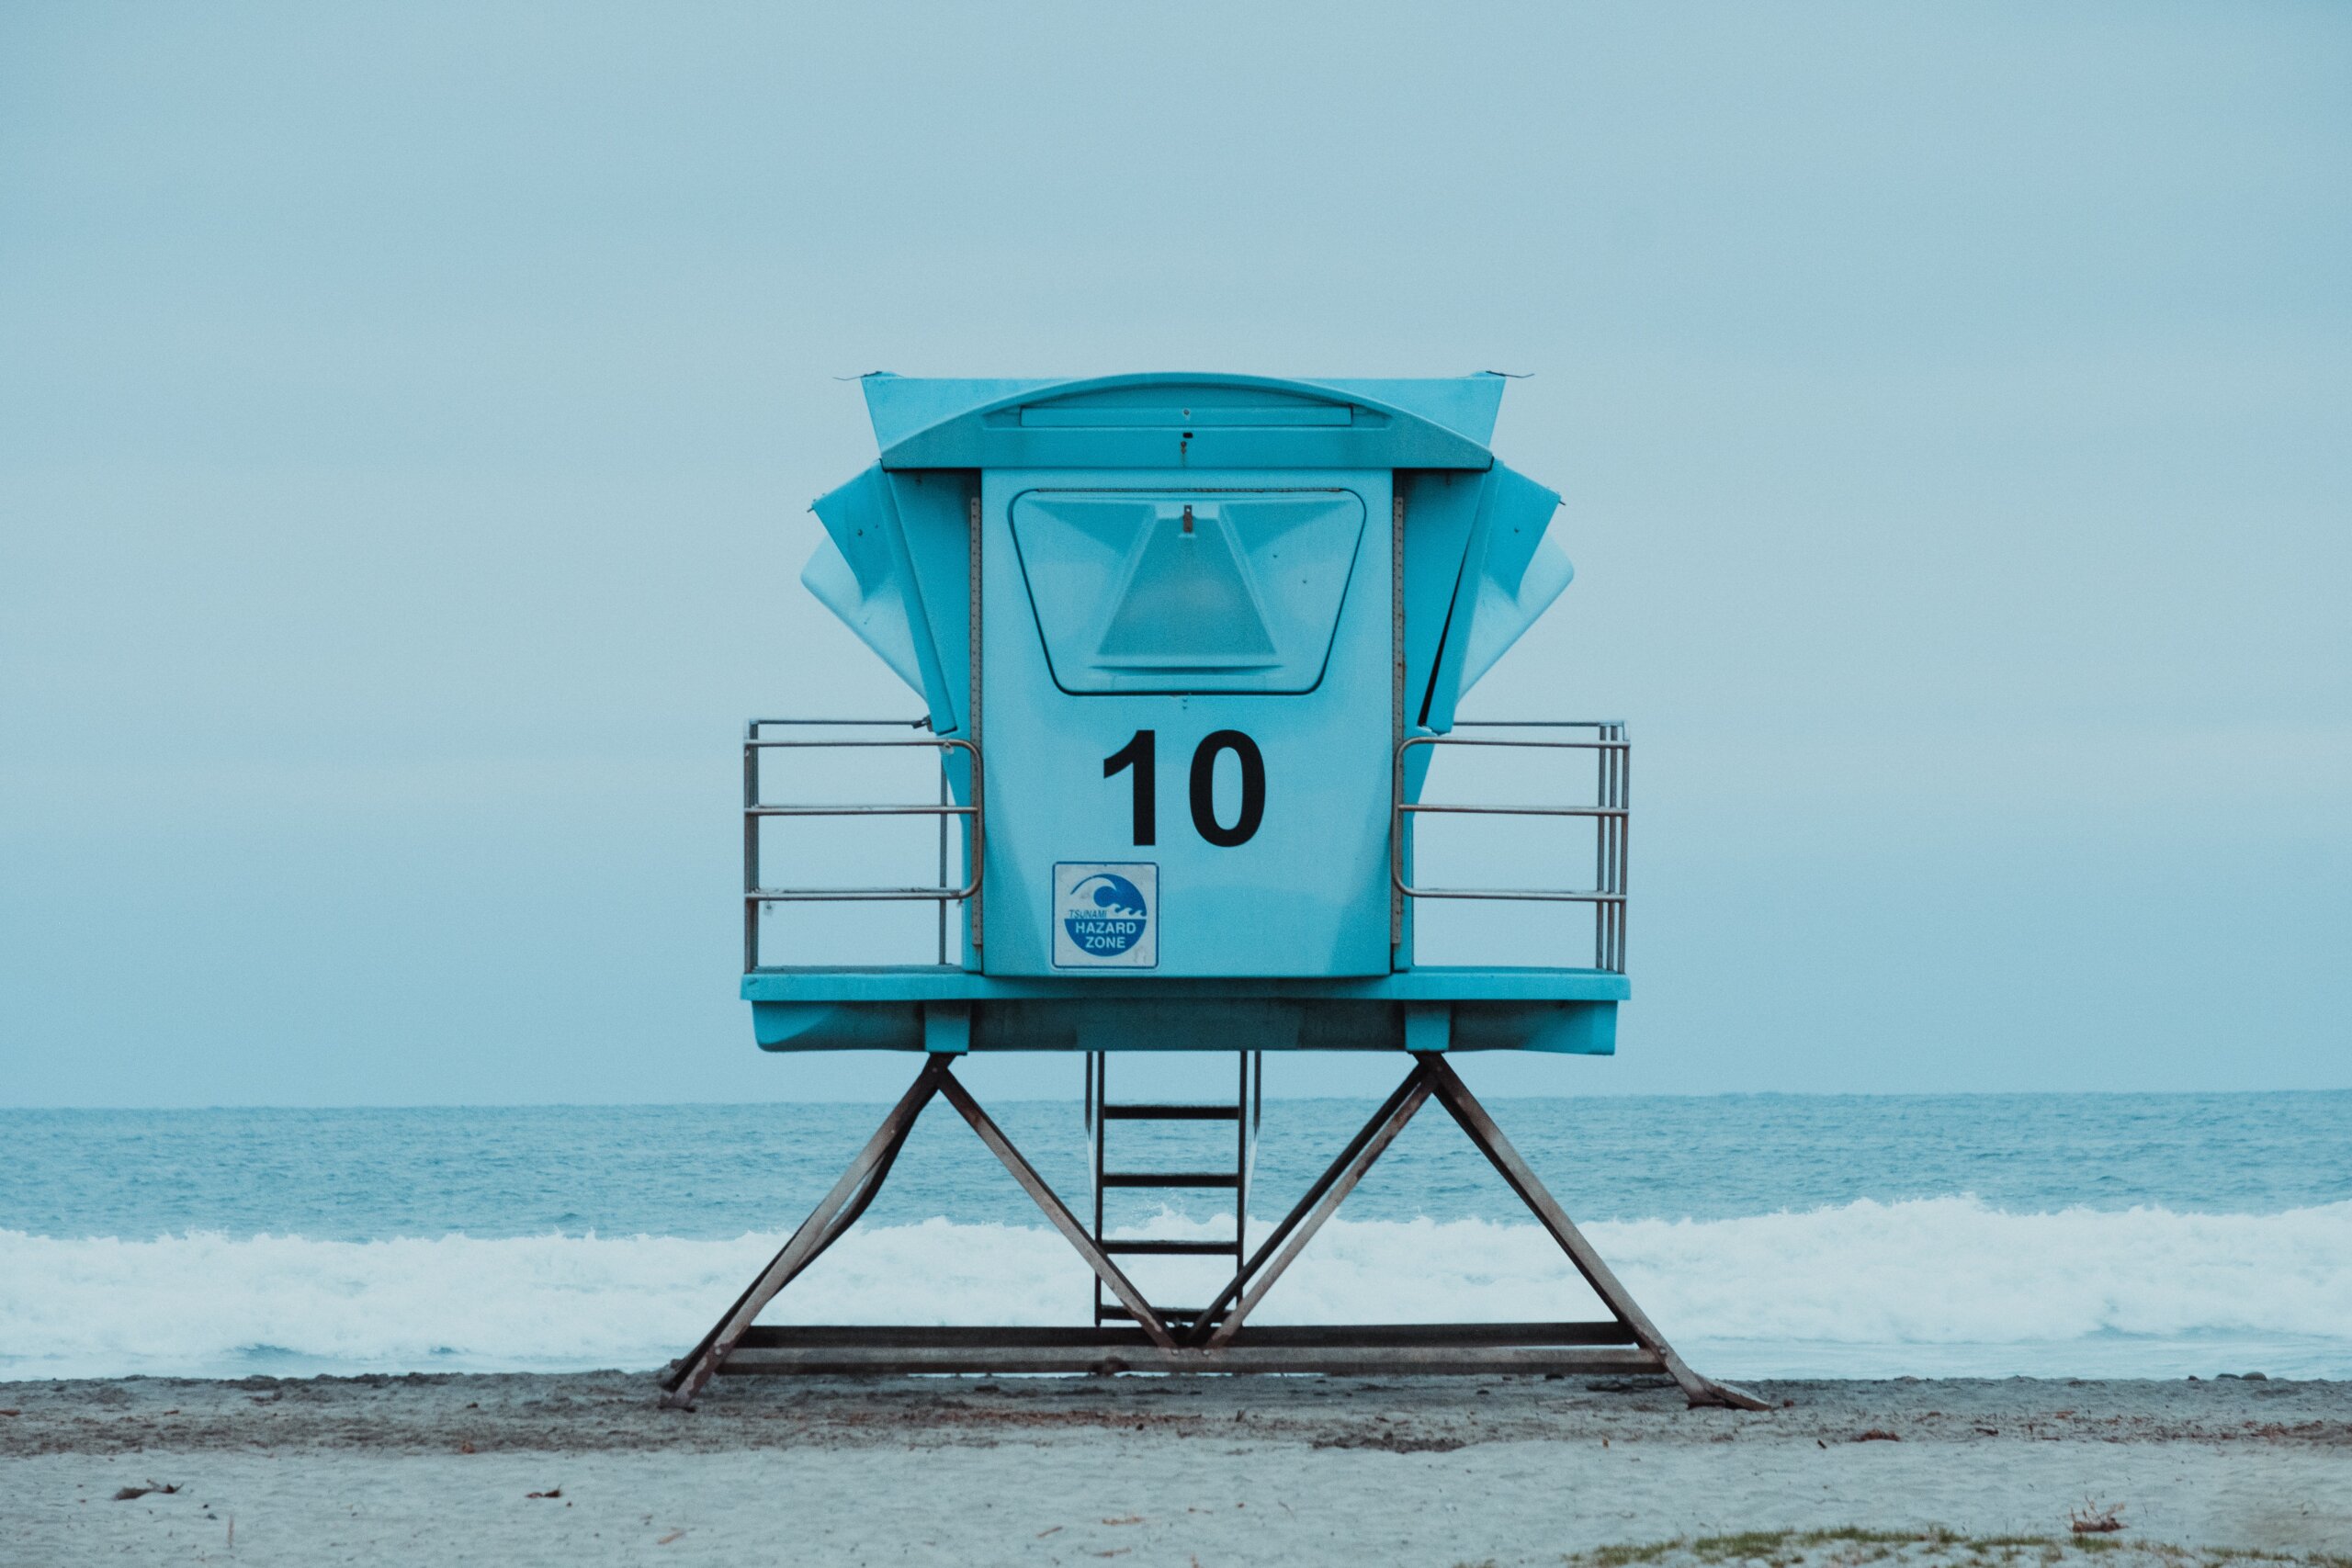 Lifeguard station with number 10 on it at beach